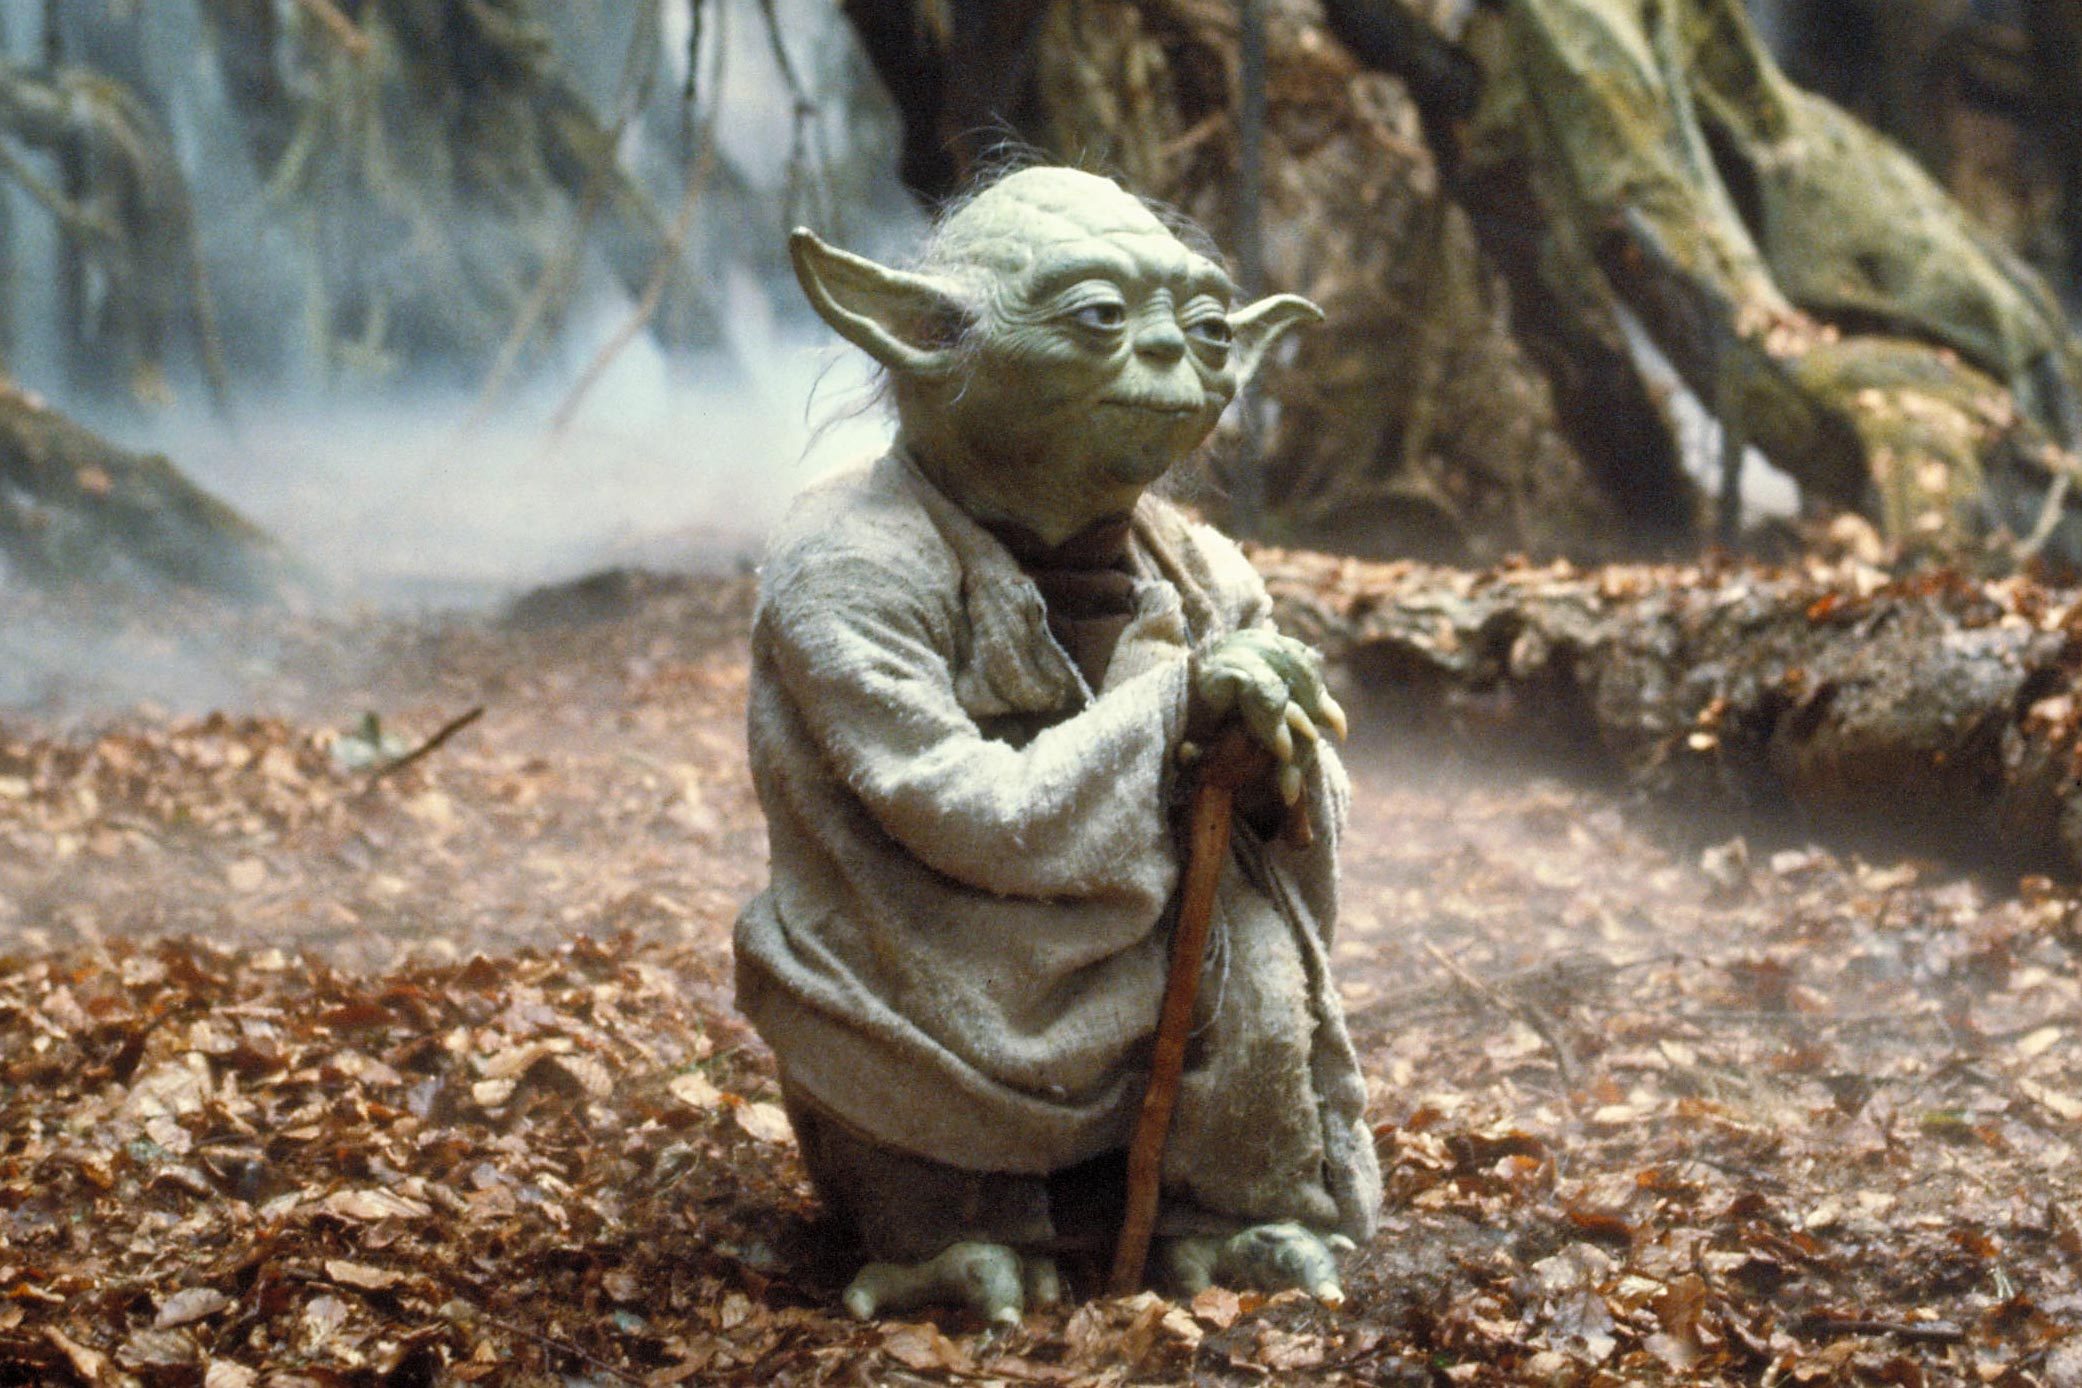 Powerful Yoda Quotes to Awaken Your Inner Force | Reader's Digest